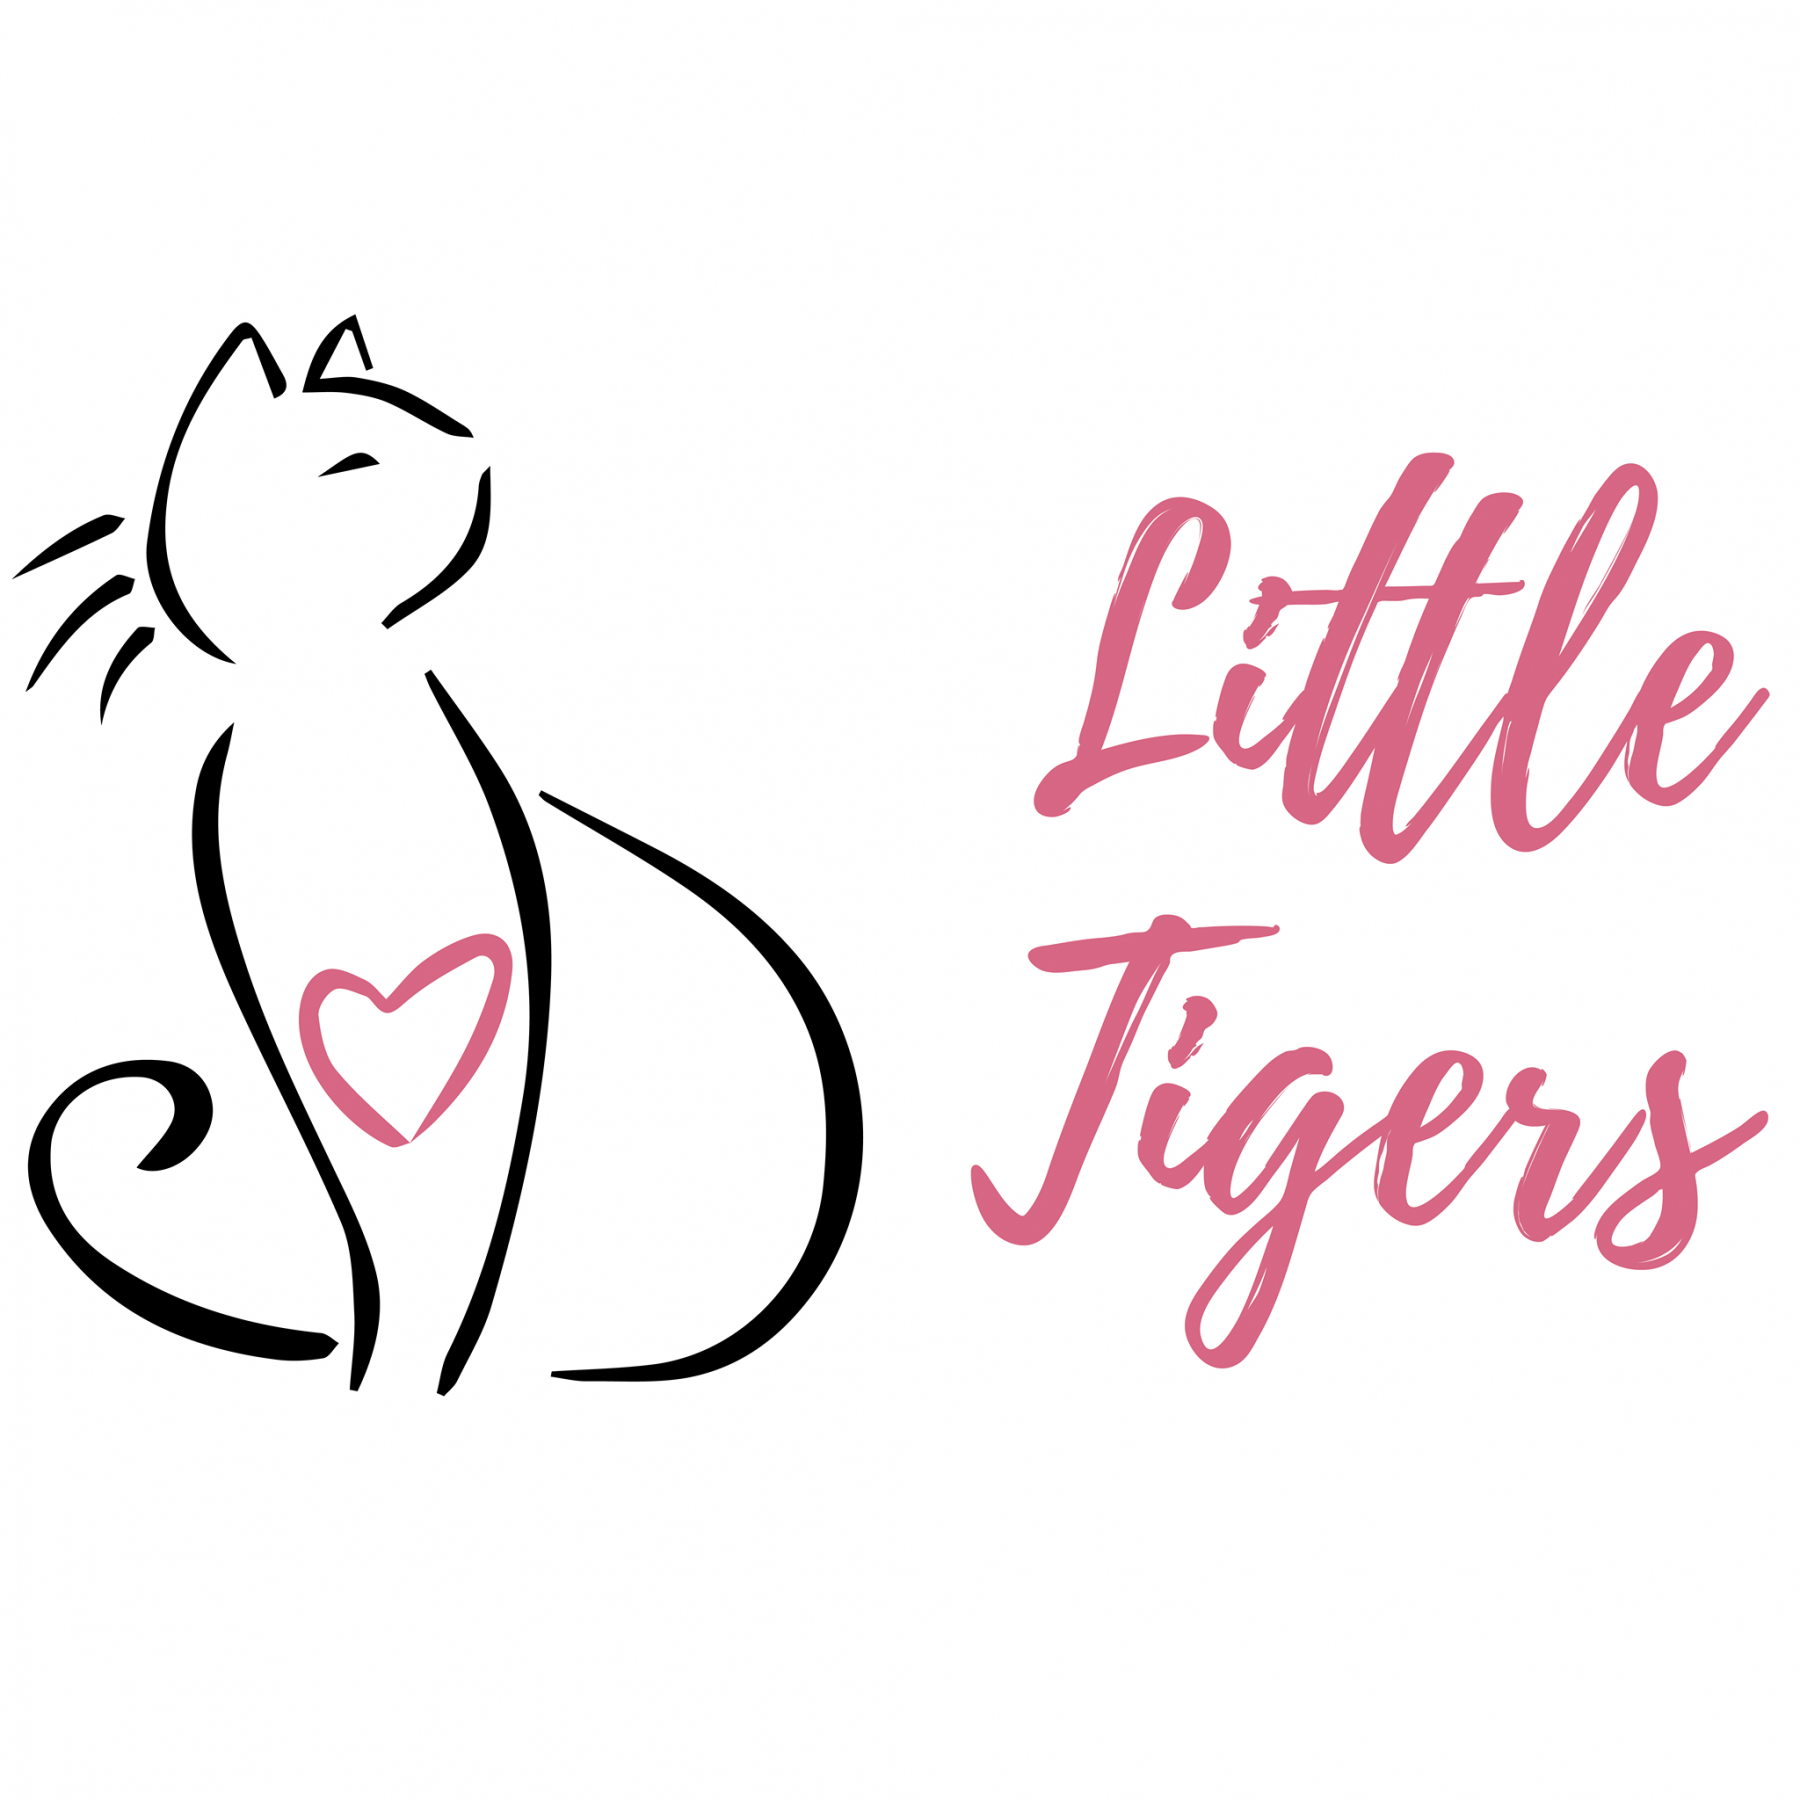 STICHTING LITTLE TIGERS